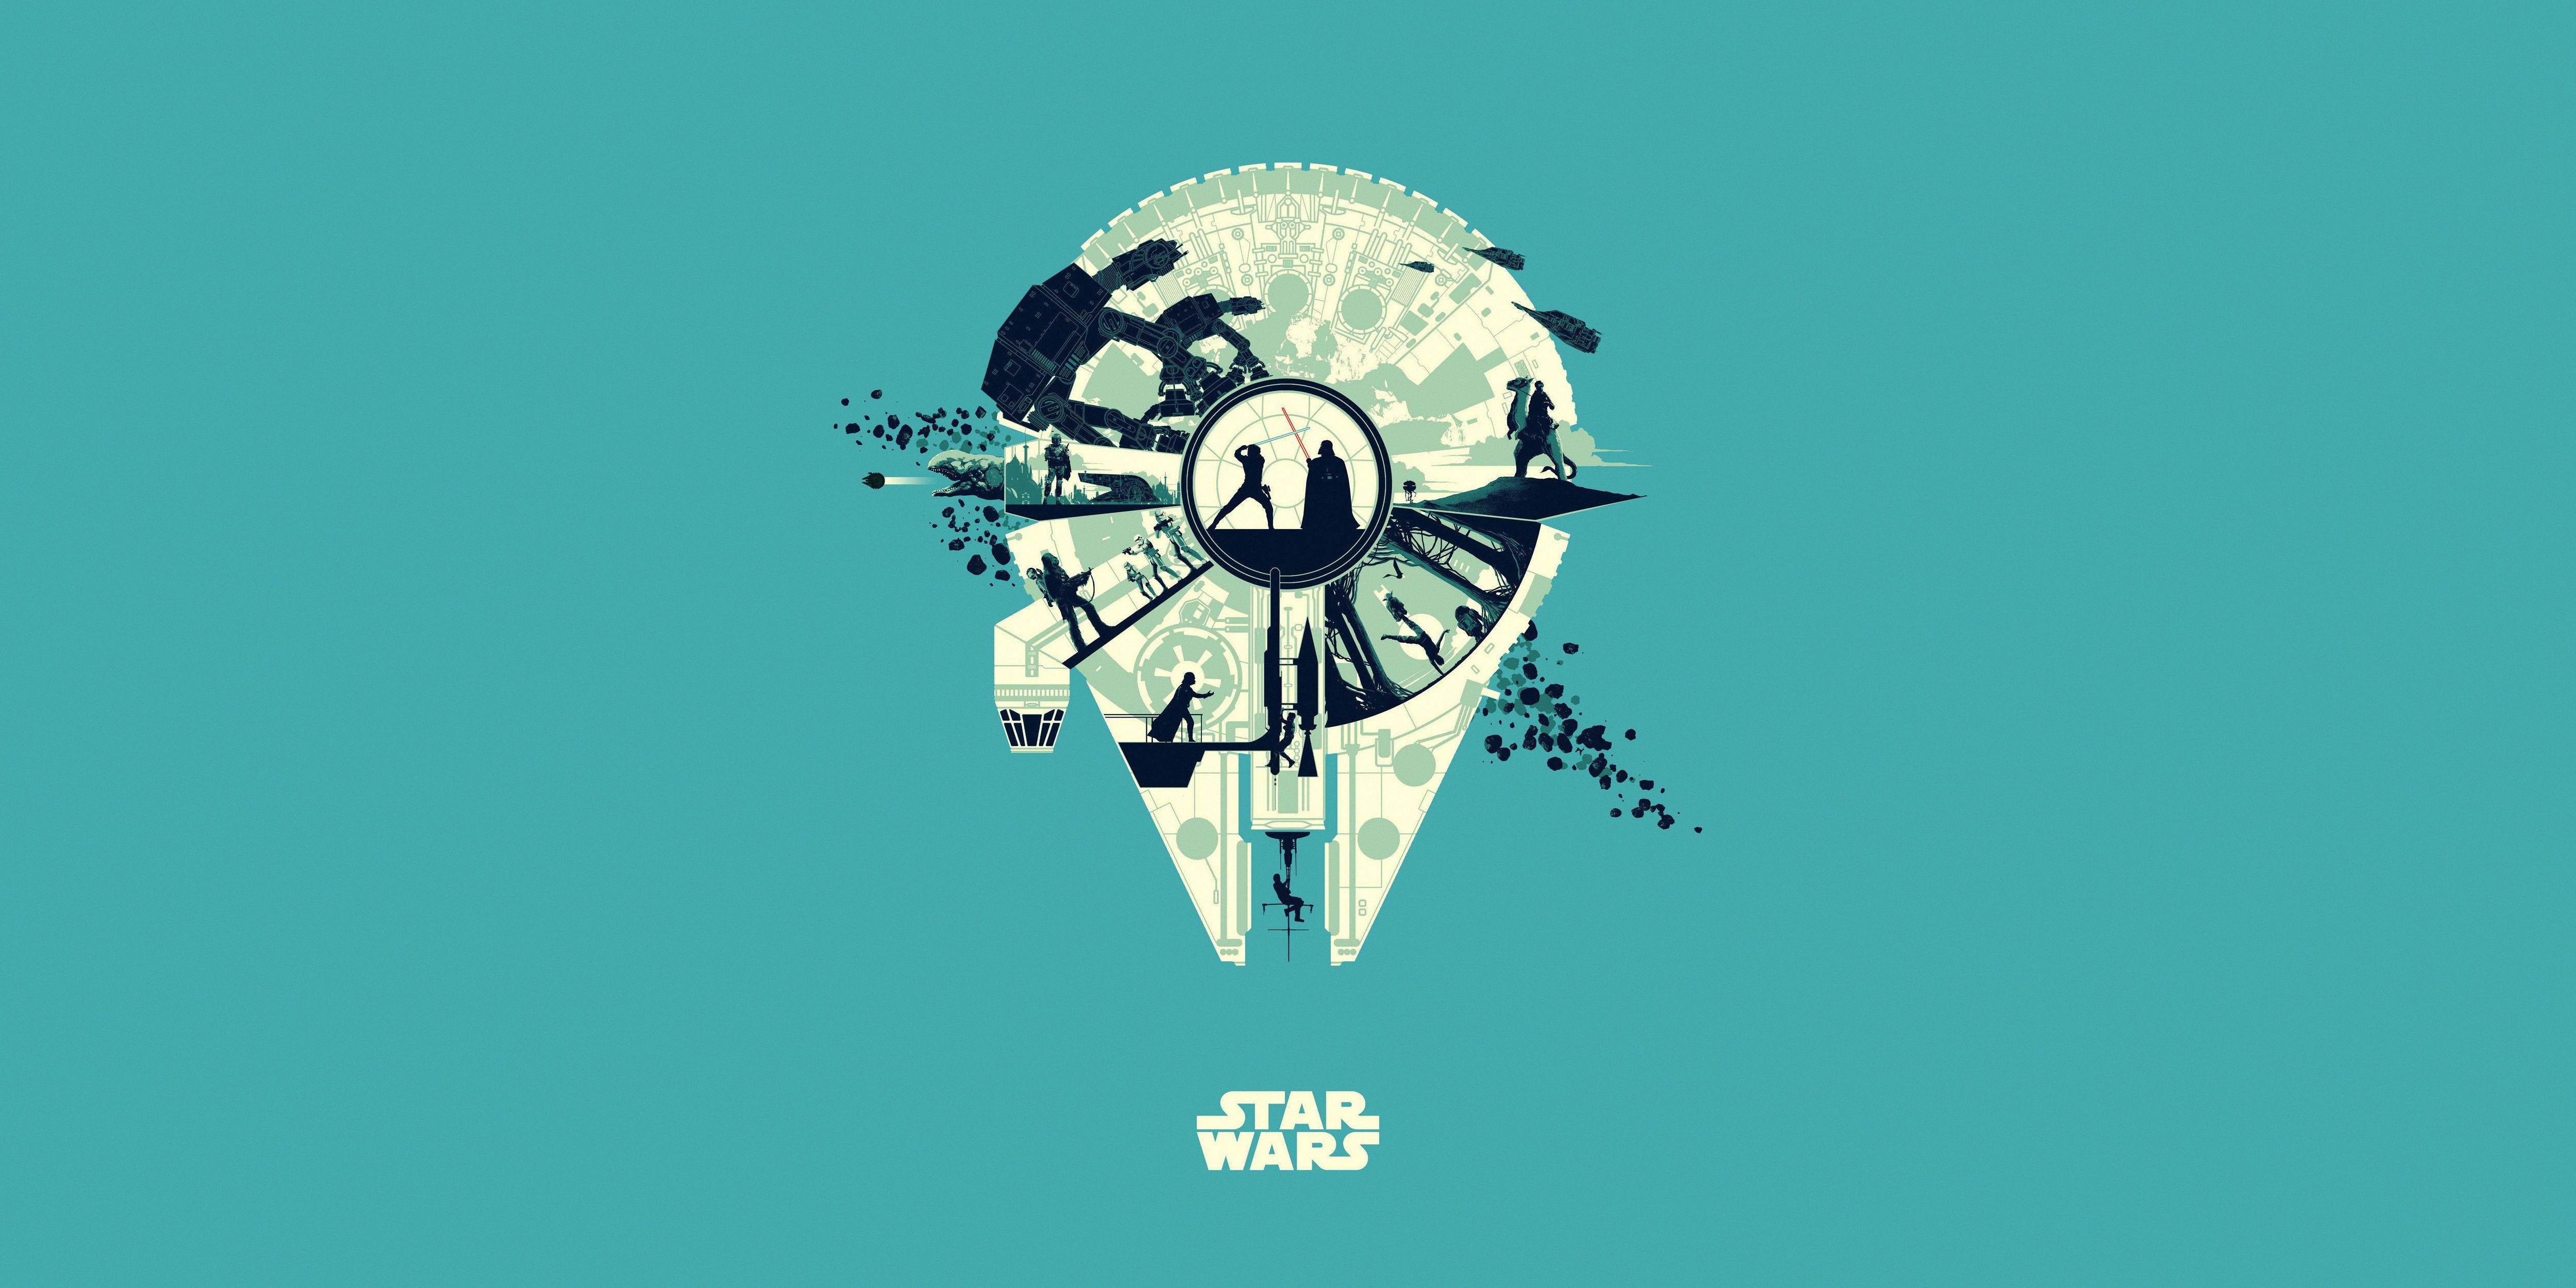 Star Wars wallpaper with the Millennium Falcon and characters from the movies - Star Wars